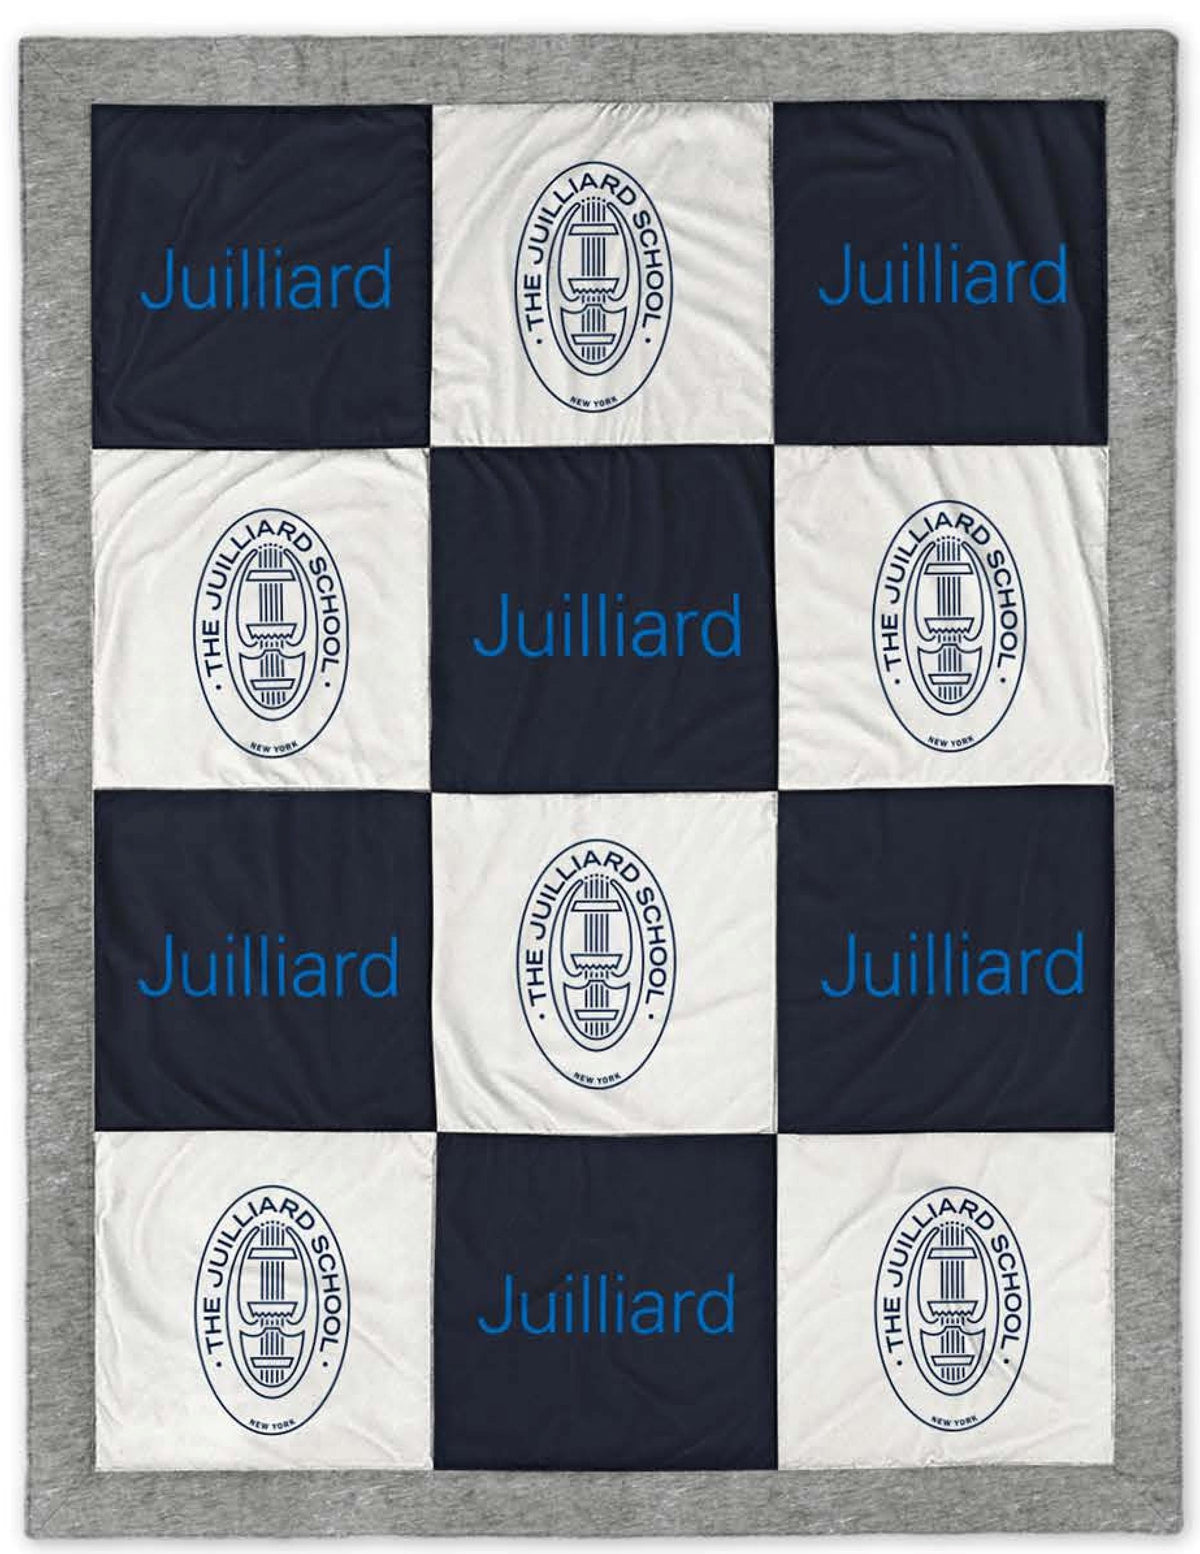 Blanket: Quilted Juilliard logo and seal (80" x 62")